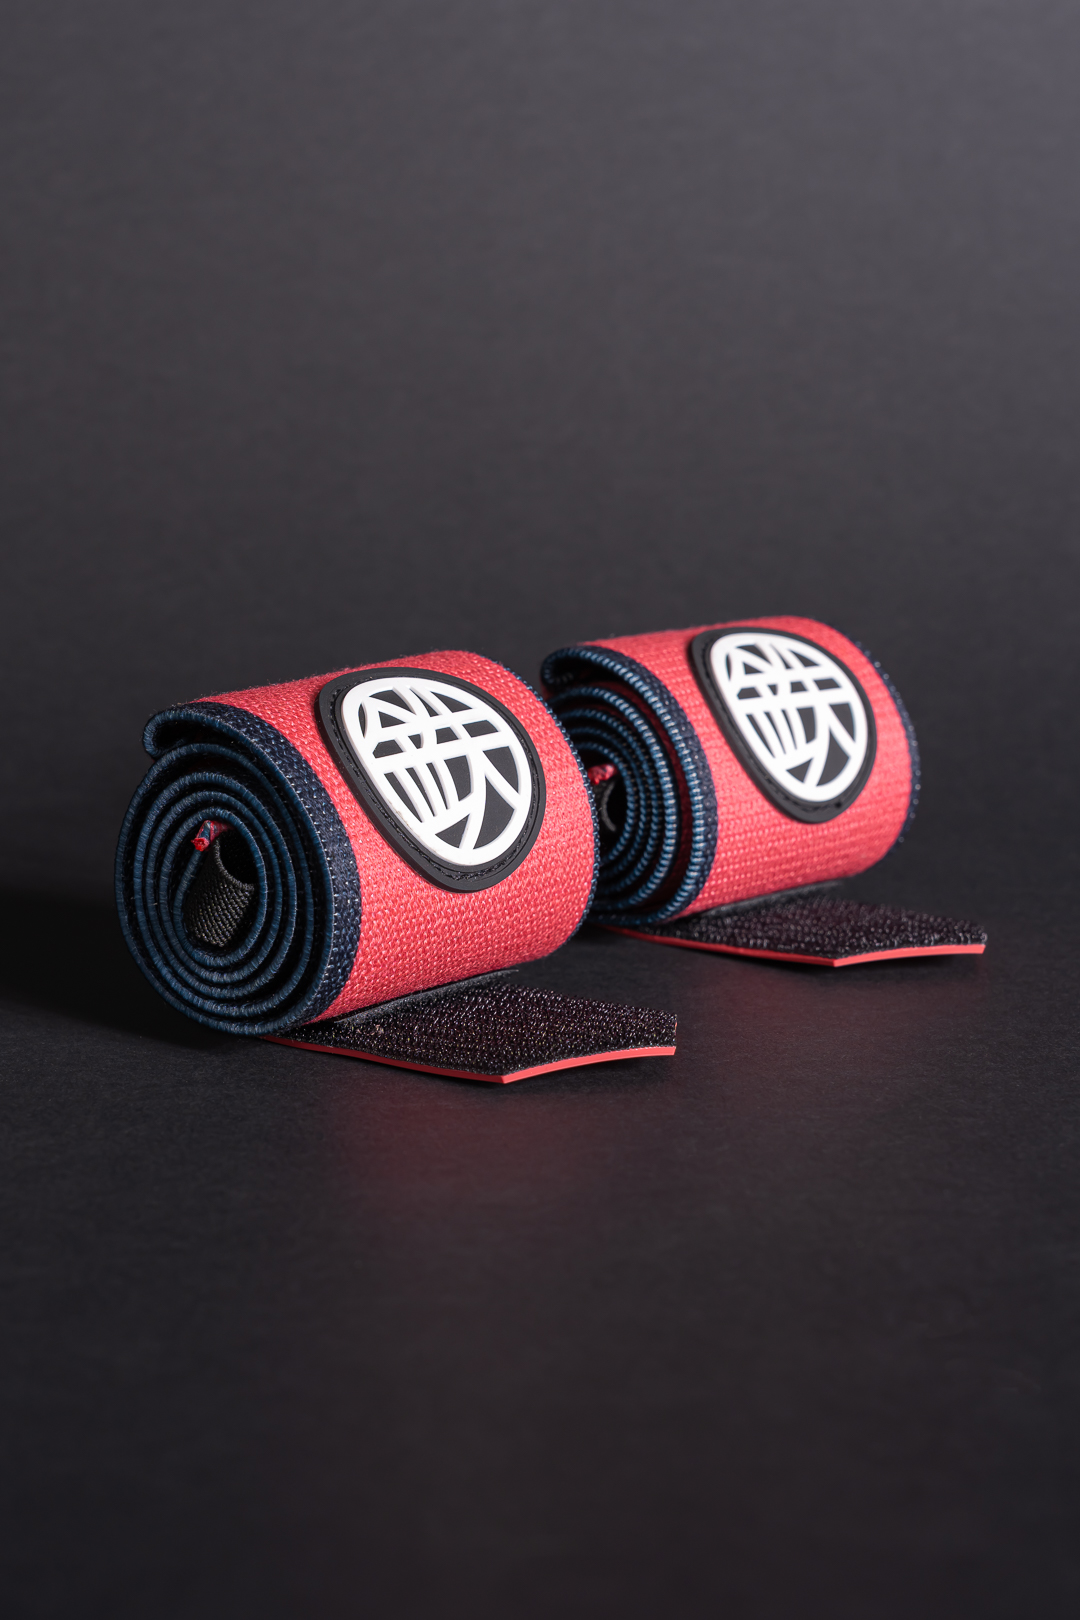 NEKOMA Wrist Wraps (shipping by mid-August)